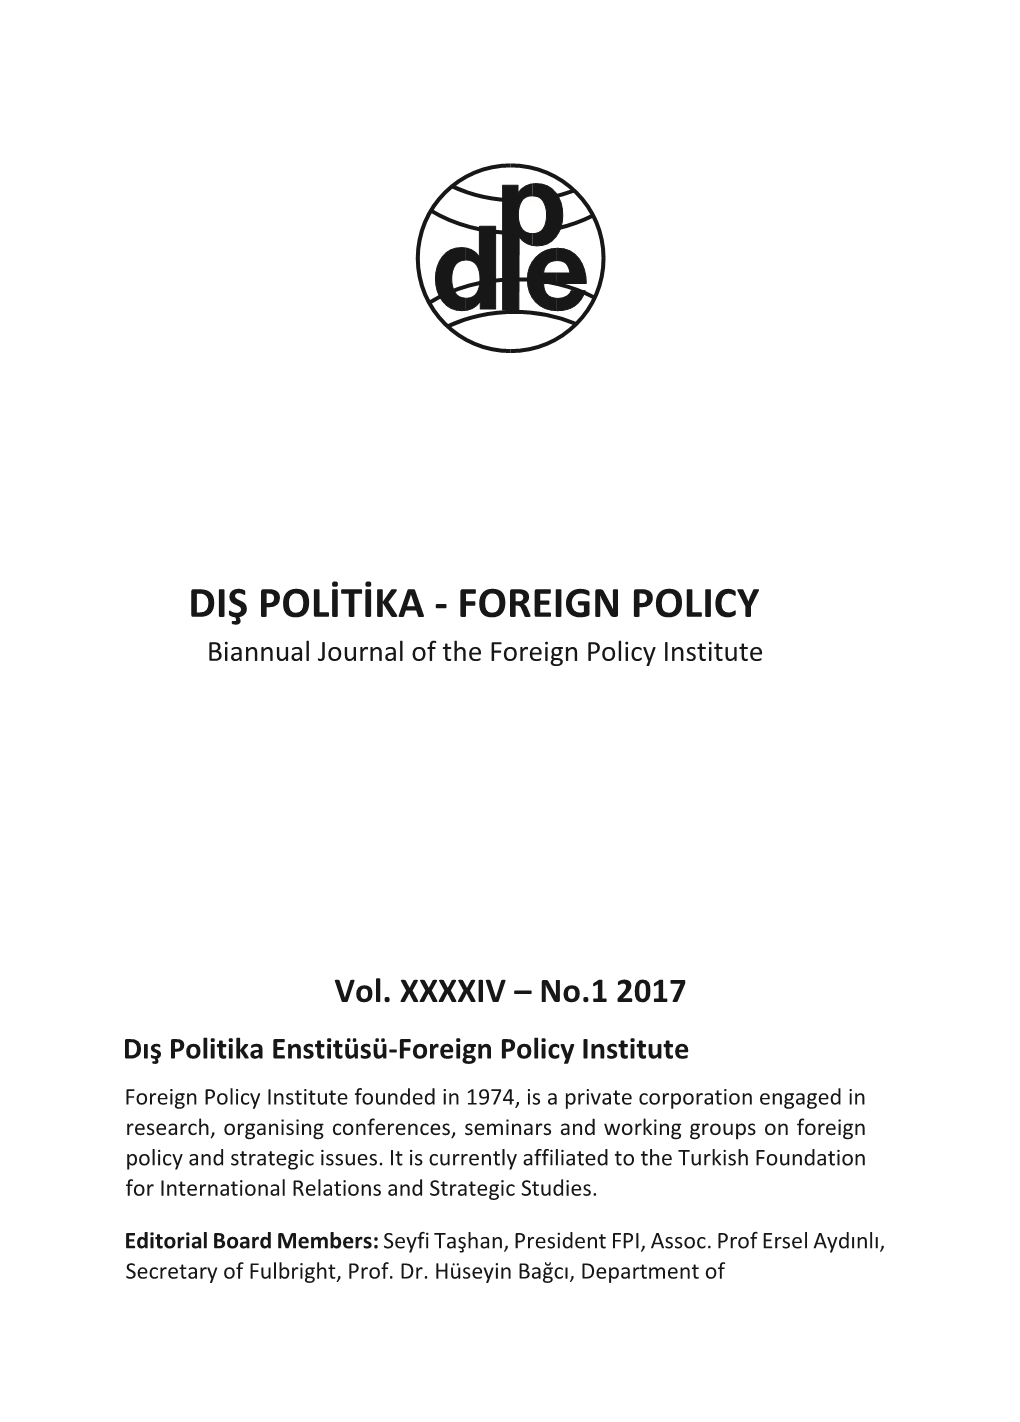 DIŞ POLİTİKA - FOREIGN POLICY Biannual Journal of the Foreign Policy Institute